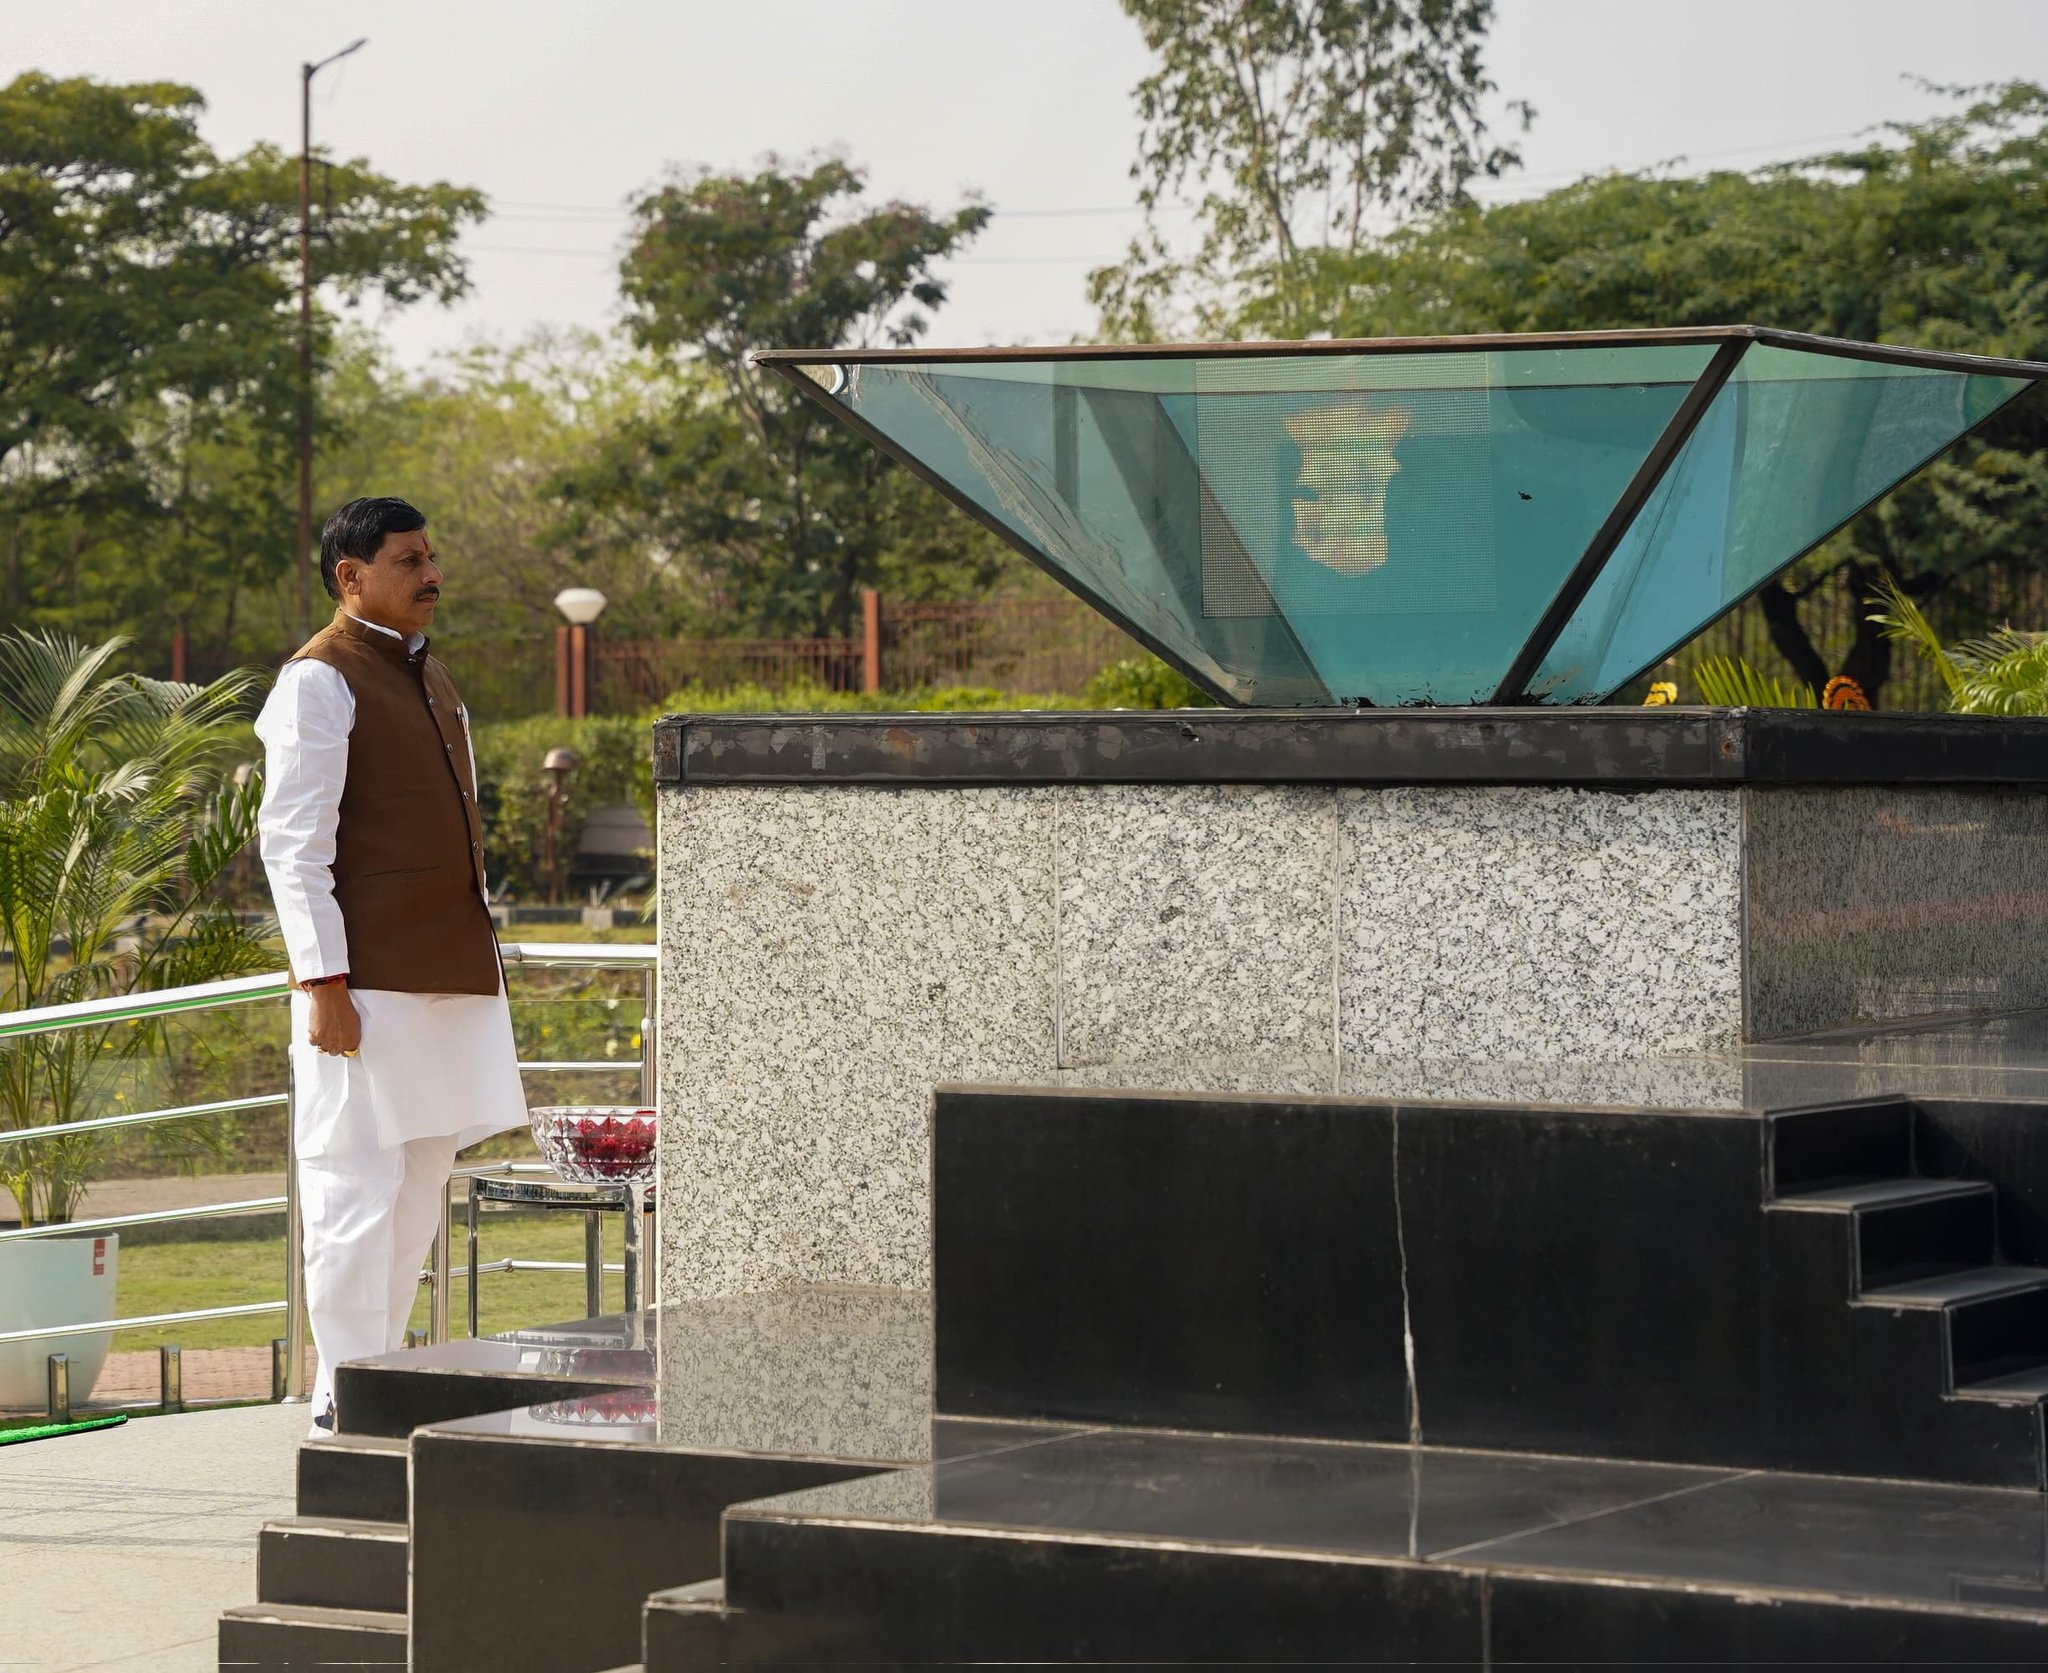 bhopal, Chief Minister Dr. Yadav, paid tribute 